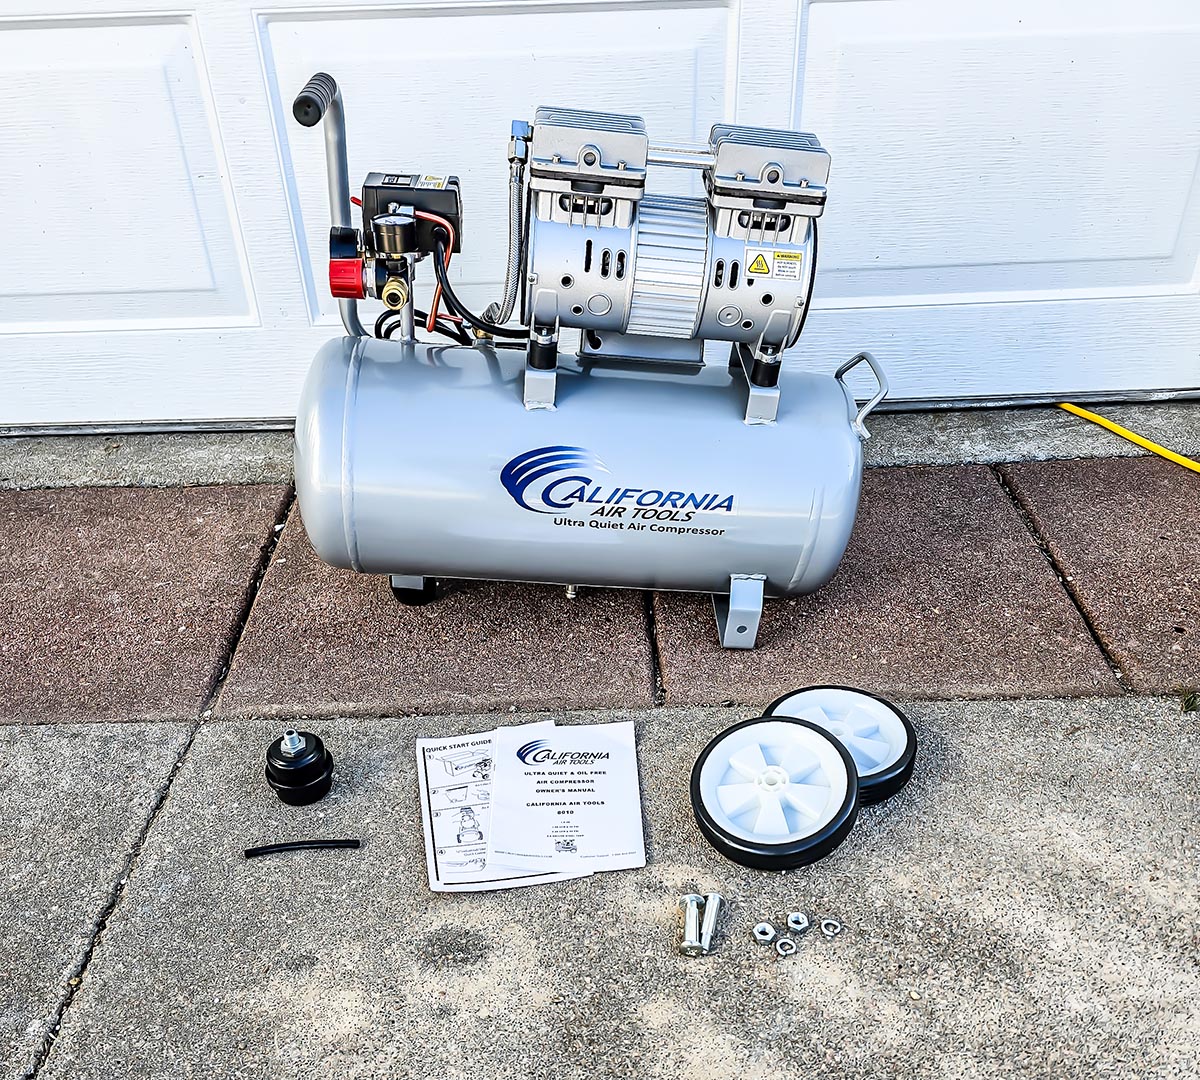 The California Air Tools 8010 Ultra Quiet Air Compressor on a cement pad with all its included manuals and accessories.